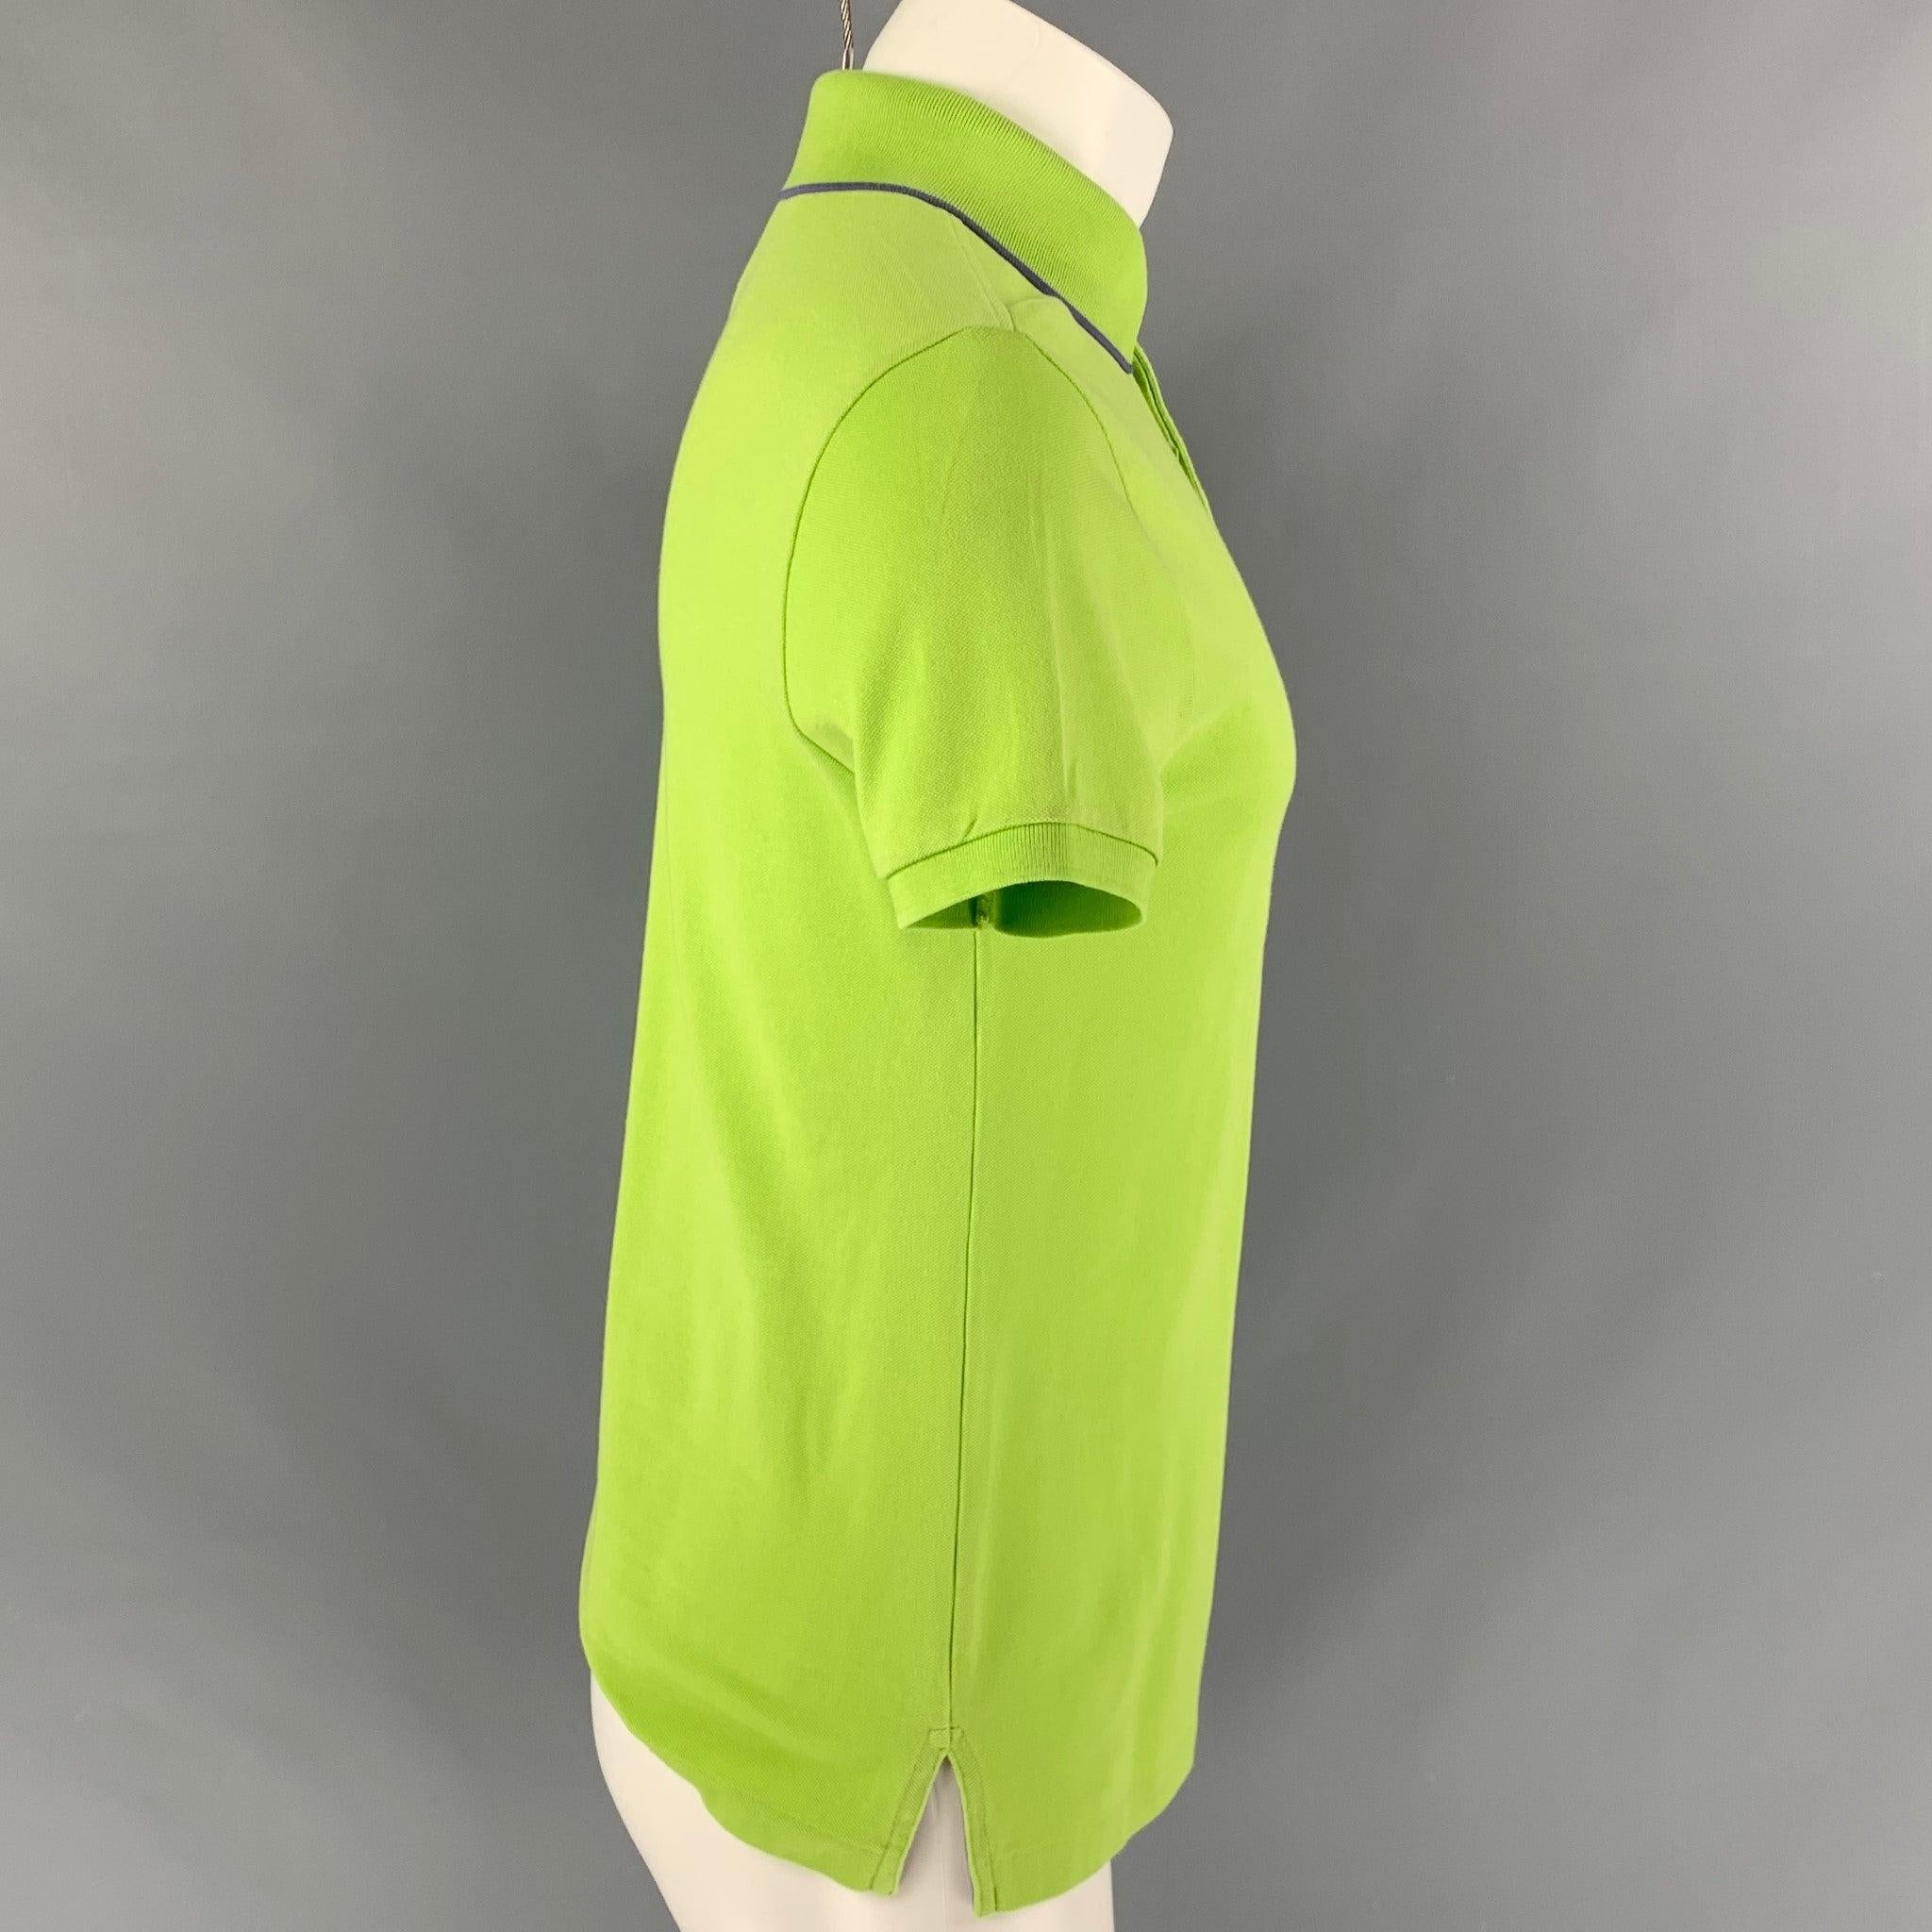 RALPH LAUREN Black Label by polo shirt comes in a green cotton and elastane piquet fabric featuring frontal pocket. Made in USA.Excellent Pre-Owned Condition.  

Marked:   S 

Measurements: 
 
Shoulder: 18 inches Chest: 40 inches Sleeve: 8 inches